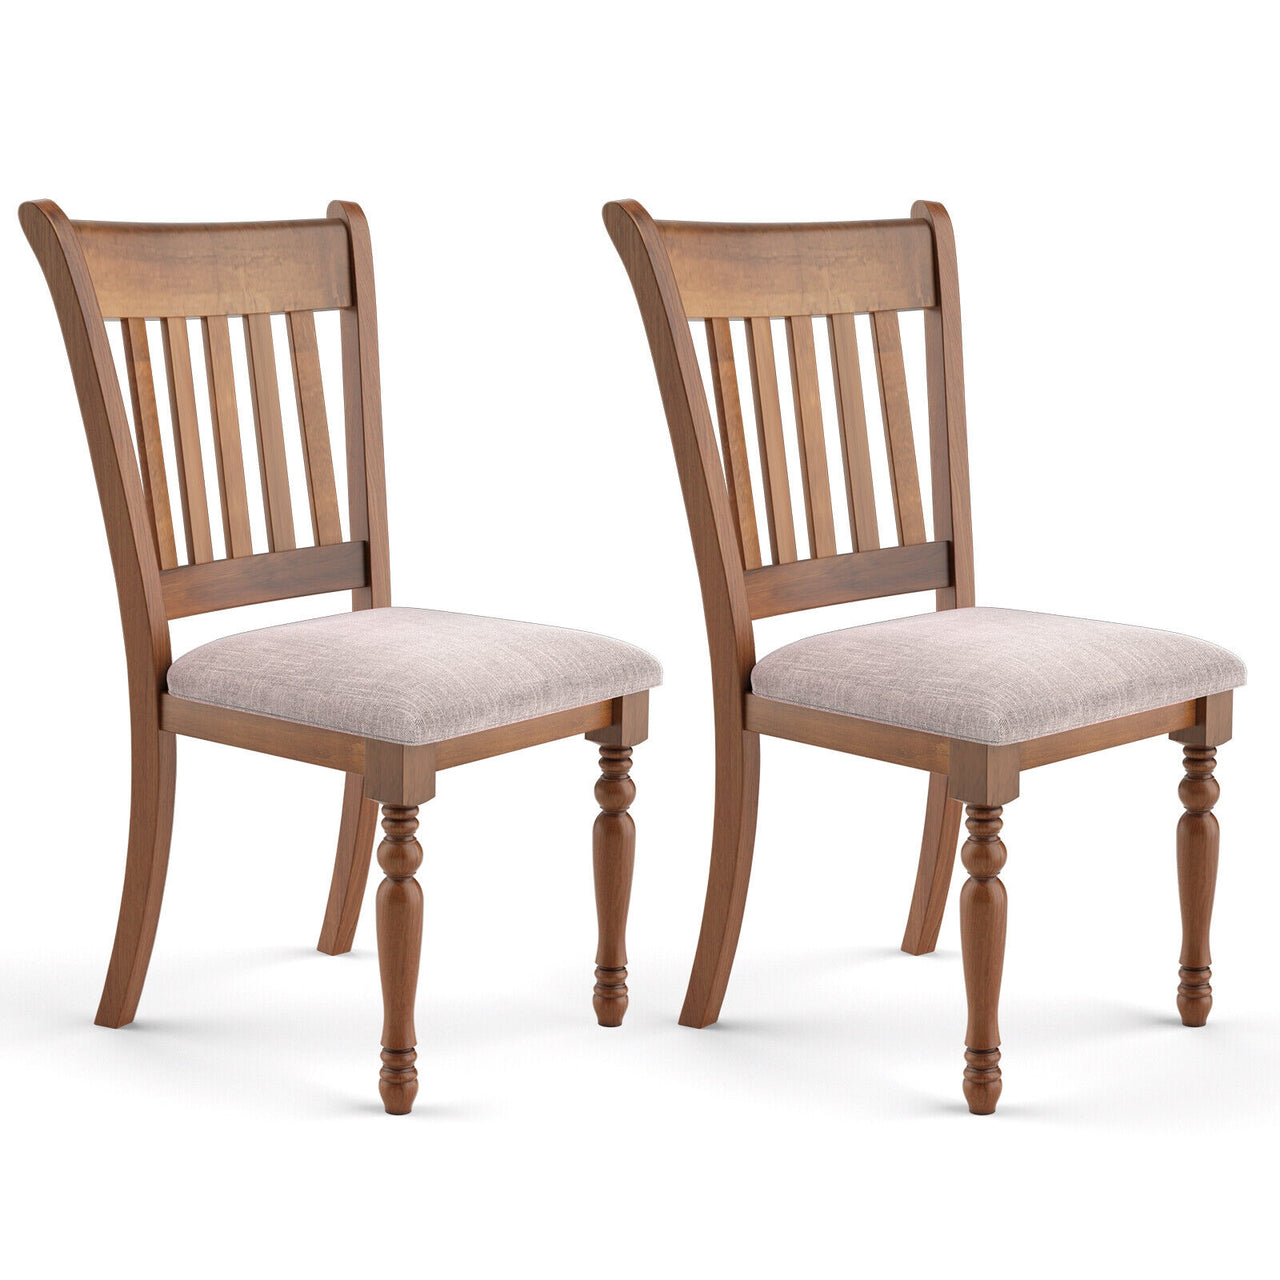 2 Pieces Vintage Wooden Upholstered Dining Chair Set with Padded Cushion - Gallery View 1 of 11